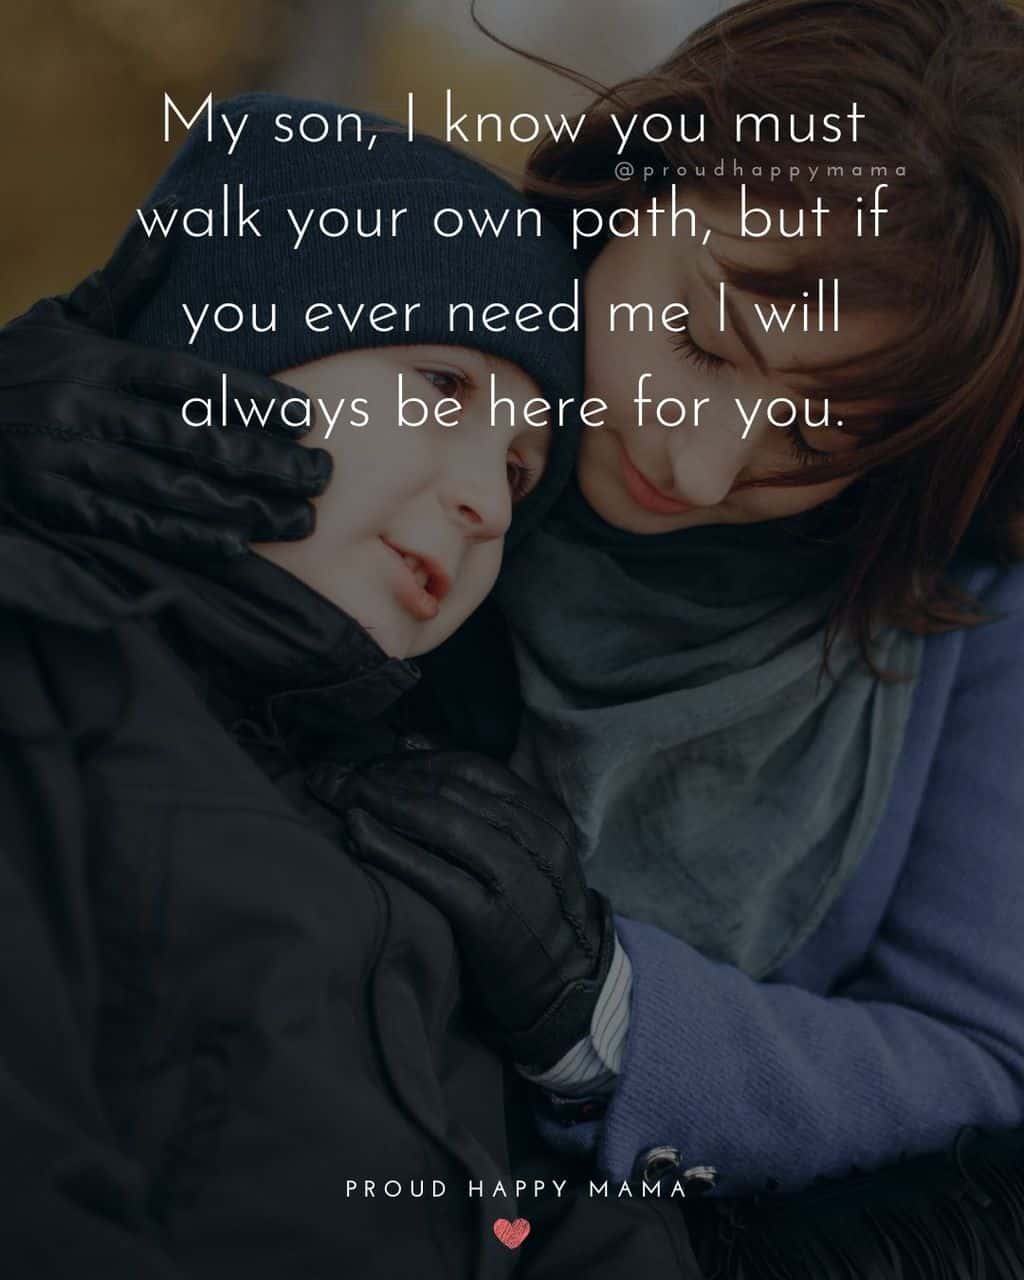 Son Quotes - My son, I know you must walk your own path, but if you ever need me I will always be here for you.’